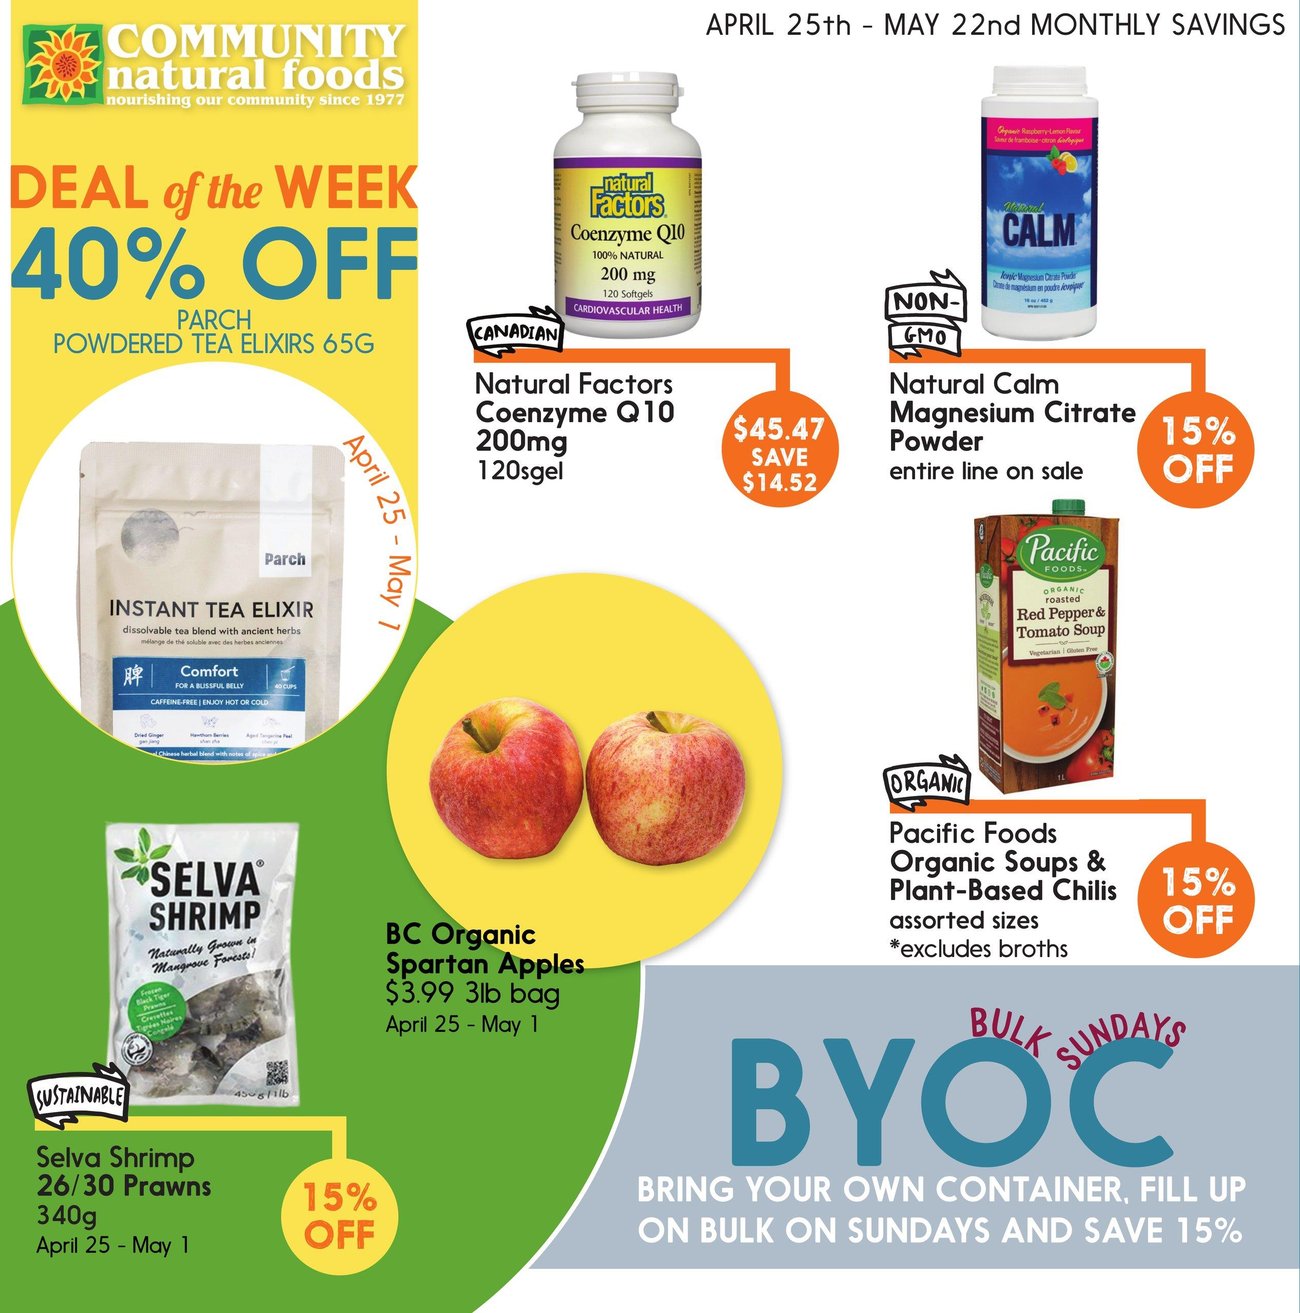 Community Natural Foods - Monthly Savings - Page 1